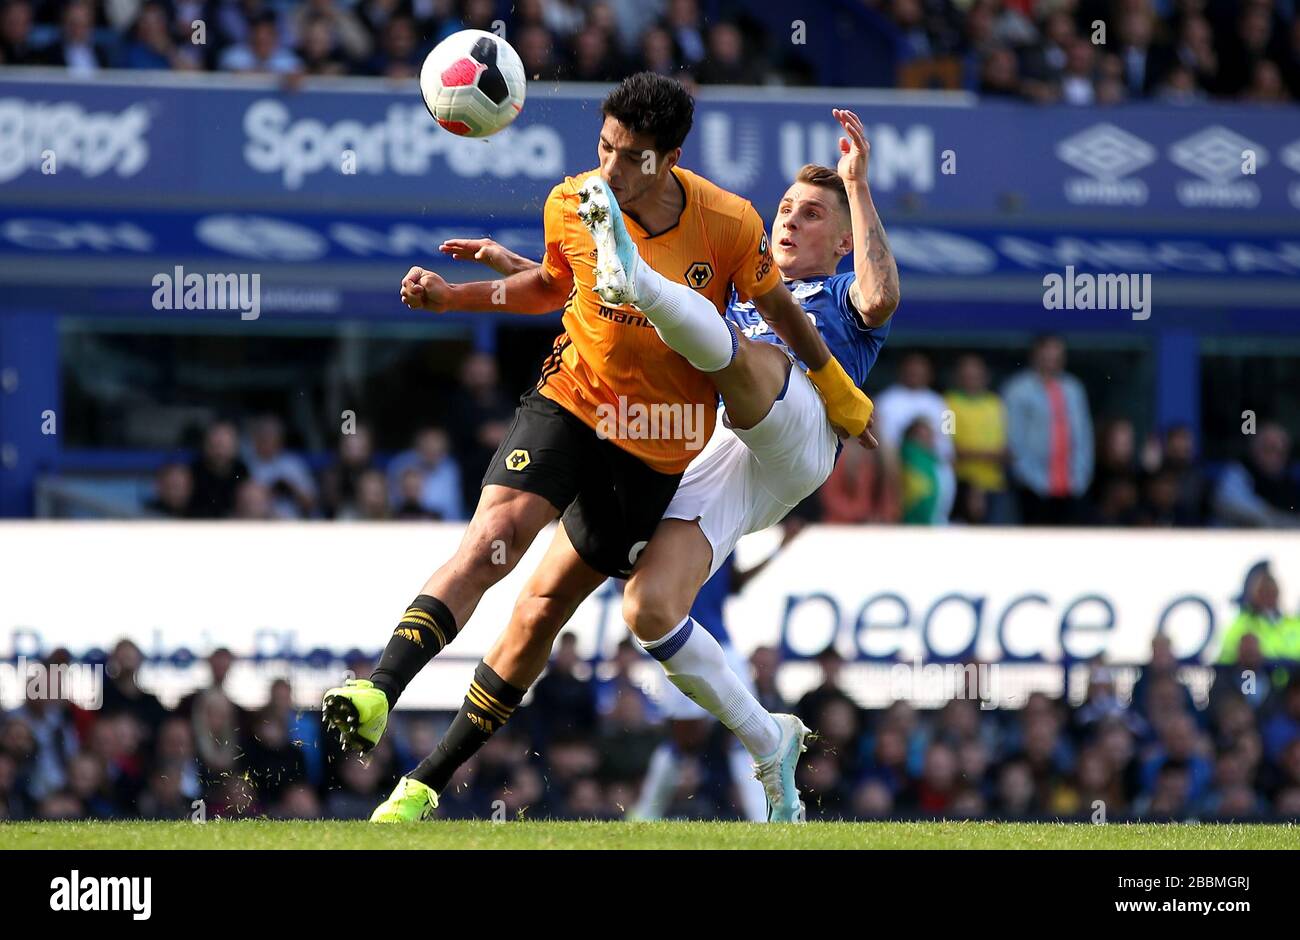 Wolverhampton Wanderers' Raul Jimenez (left) gets kicked in the face by Everton's Lucas Digne after scoring his side's second goal Stock Photo